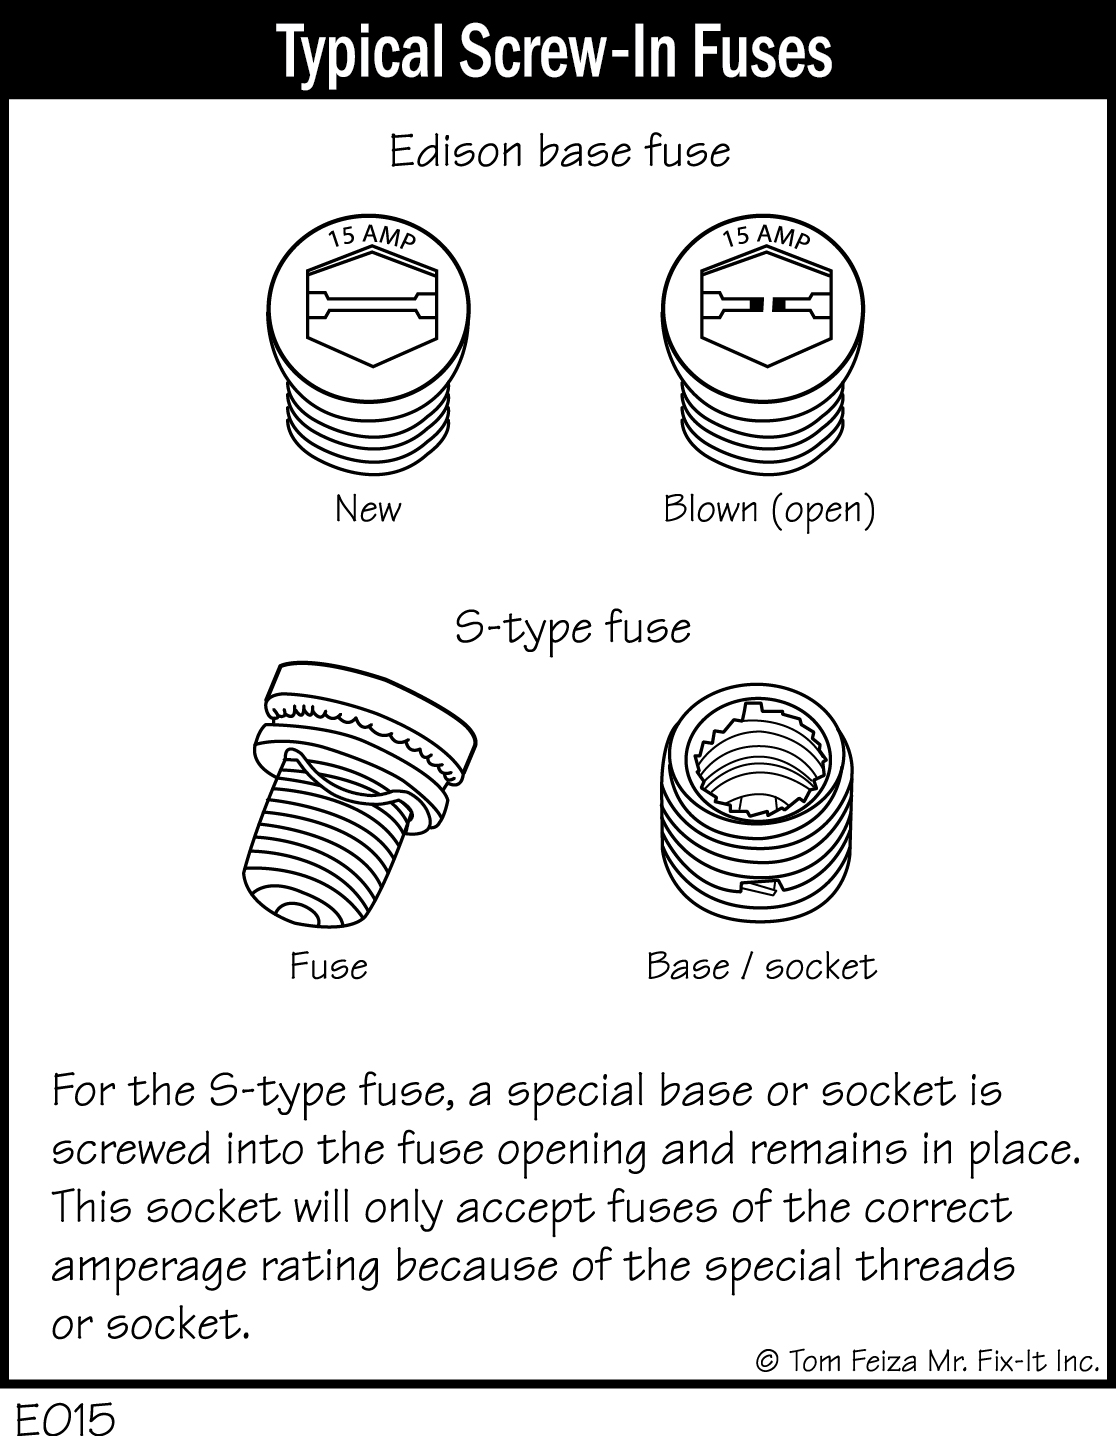 E015 - Typical Screw-In Fuses